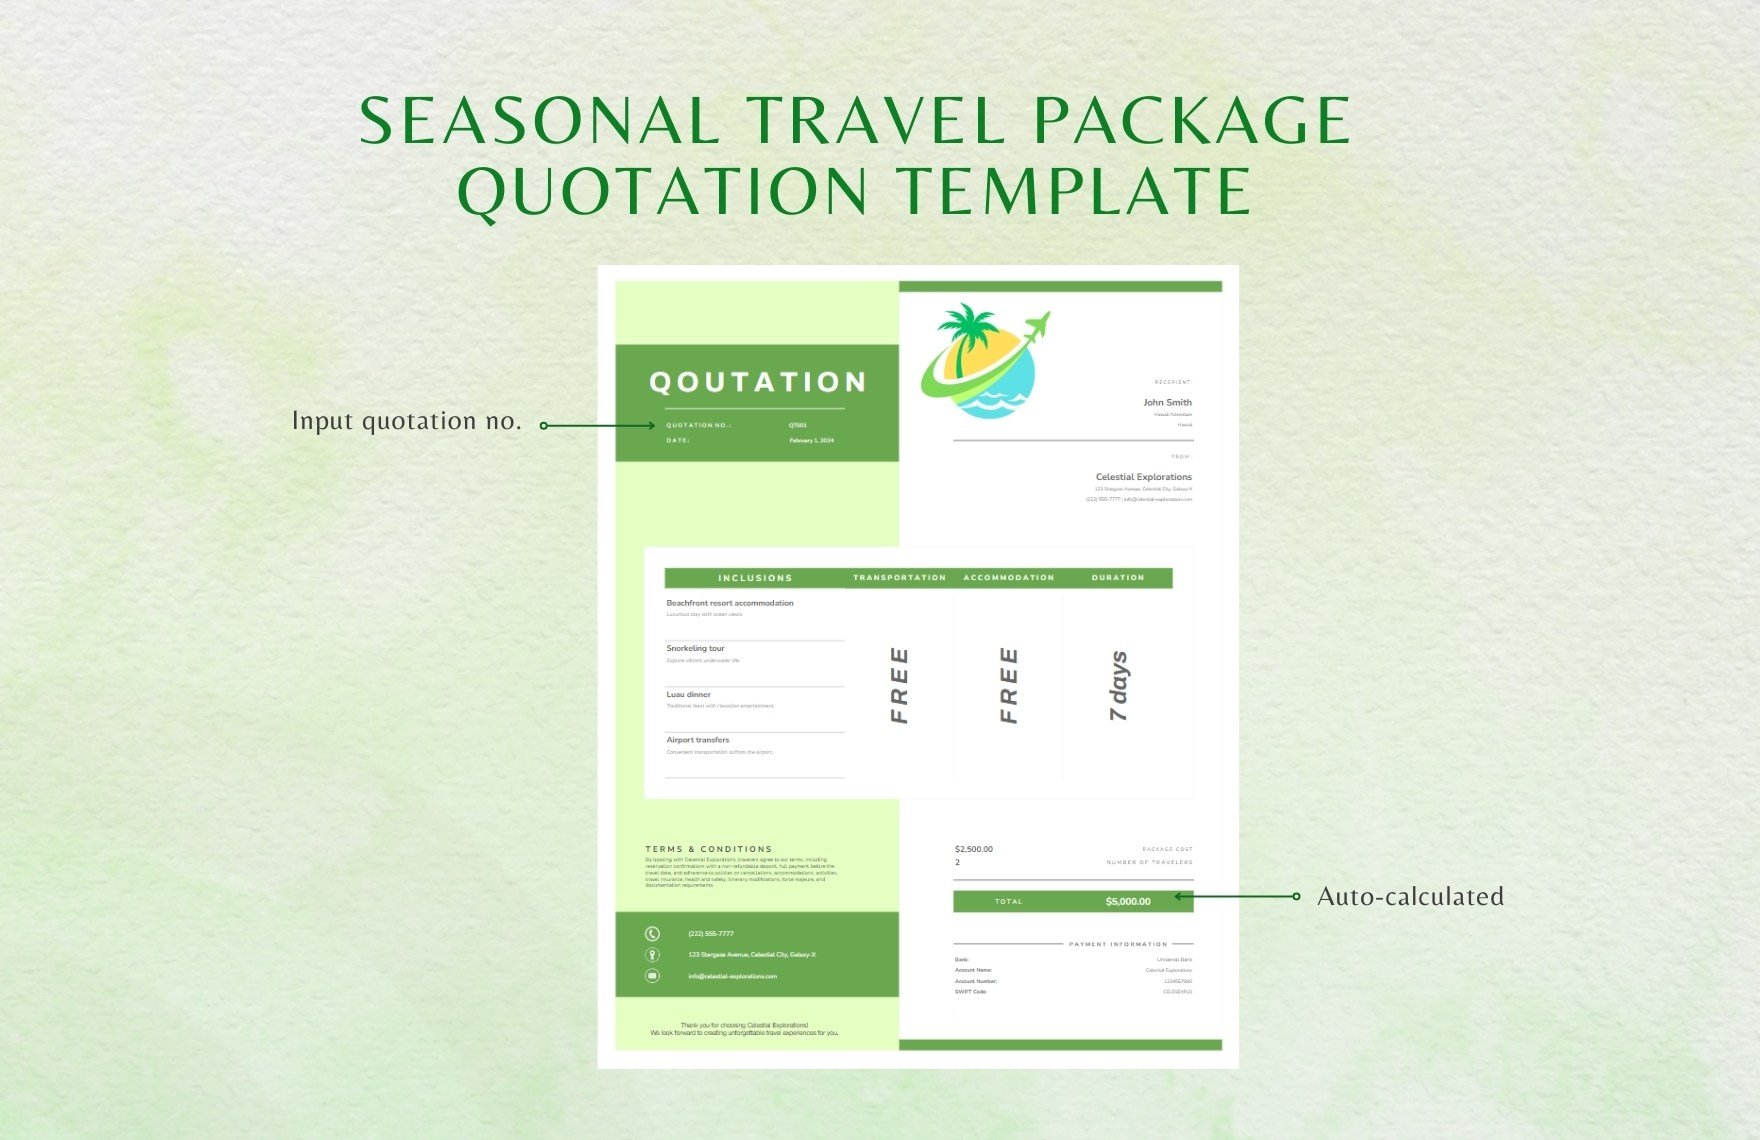 Seasonal Travel Package Quotation Template